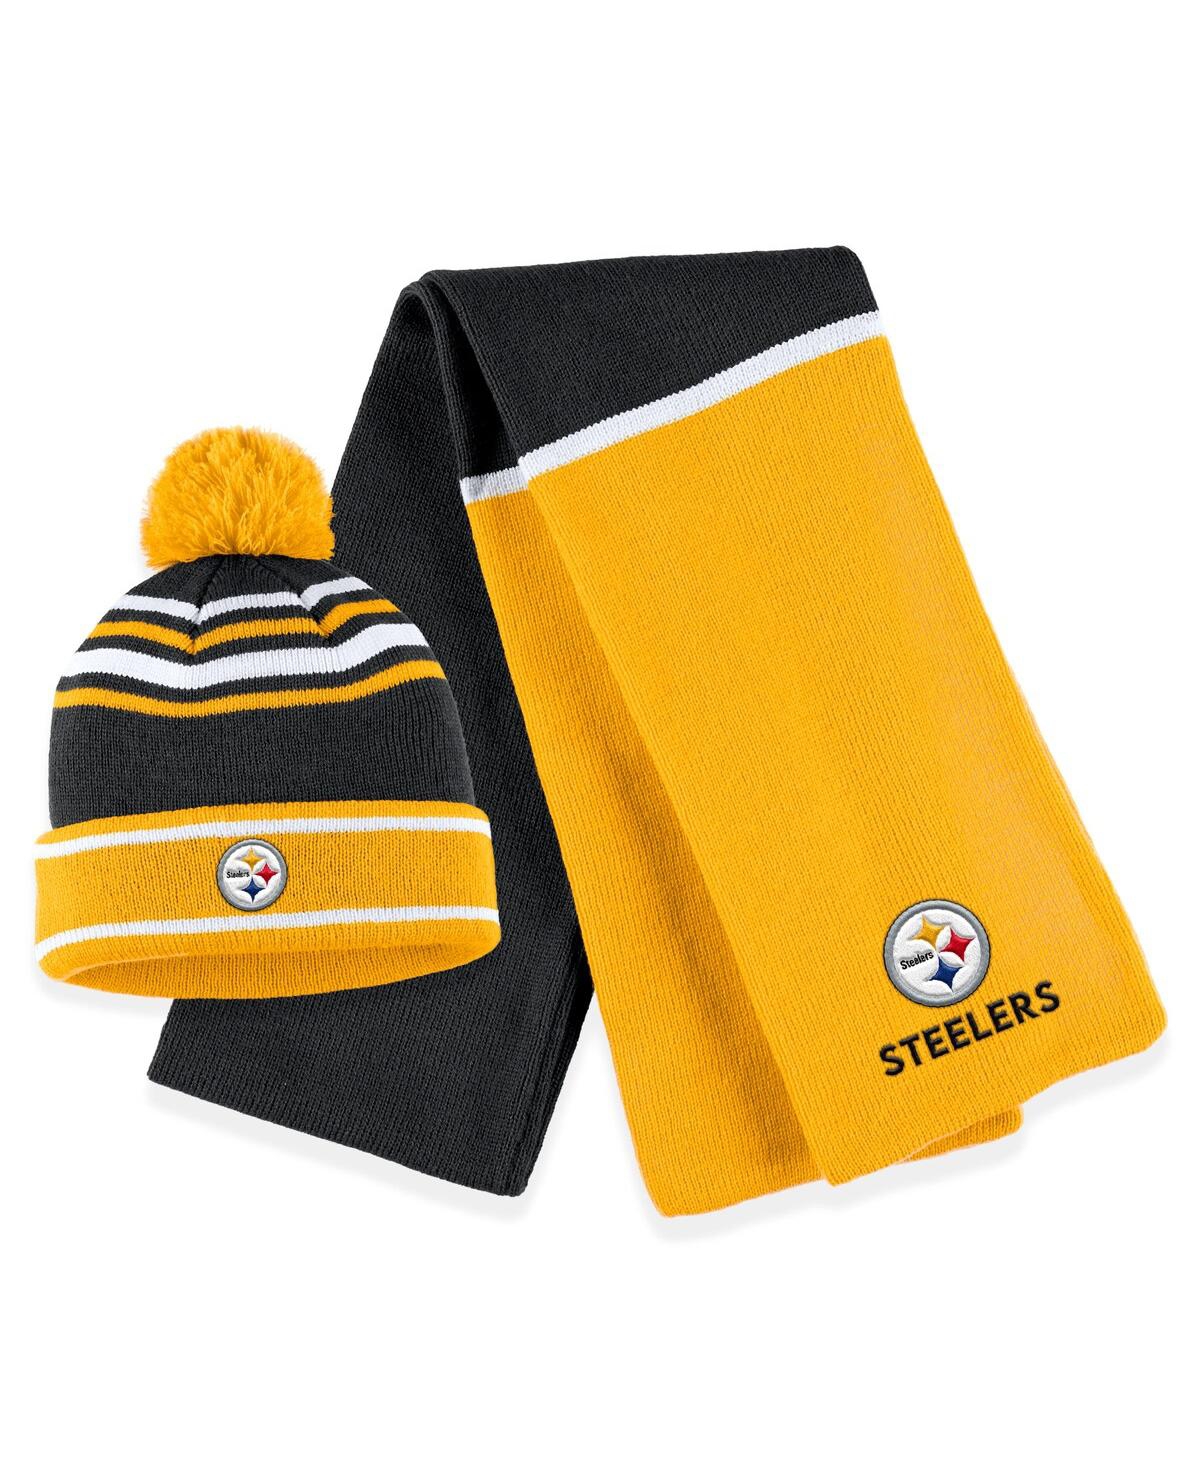 Shop Wear By Erin Andrews Women's  Black Pittsburgh Steelers Colorblock Cuffed Knit Hat With Pom And Scarf